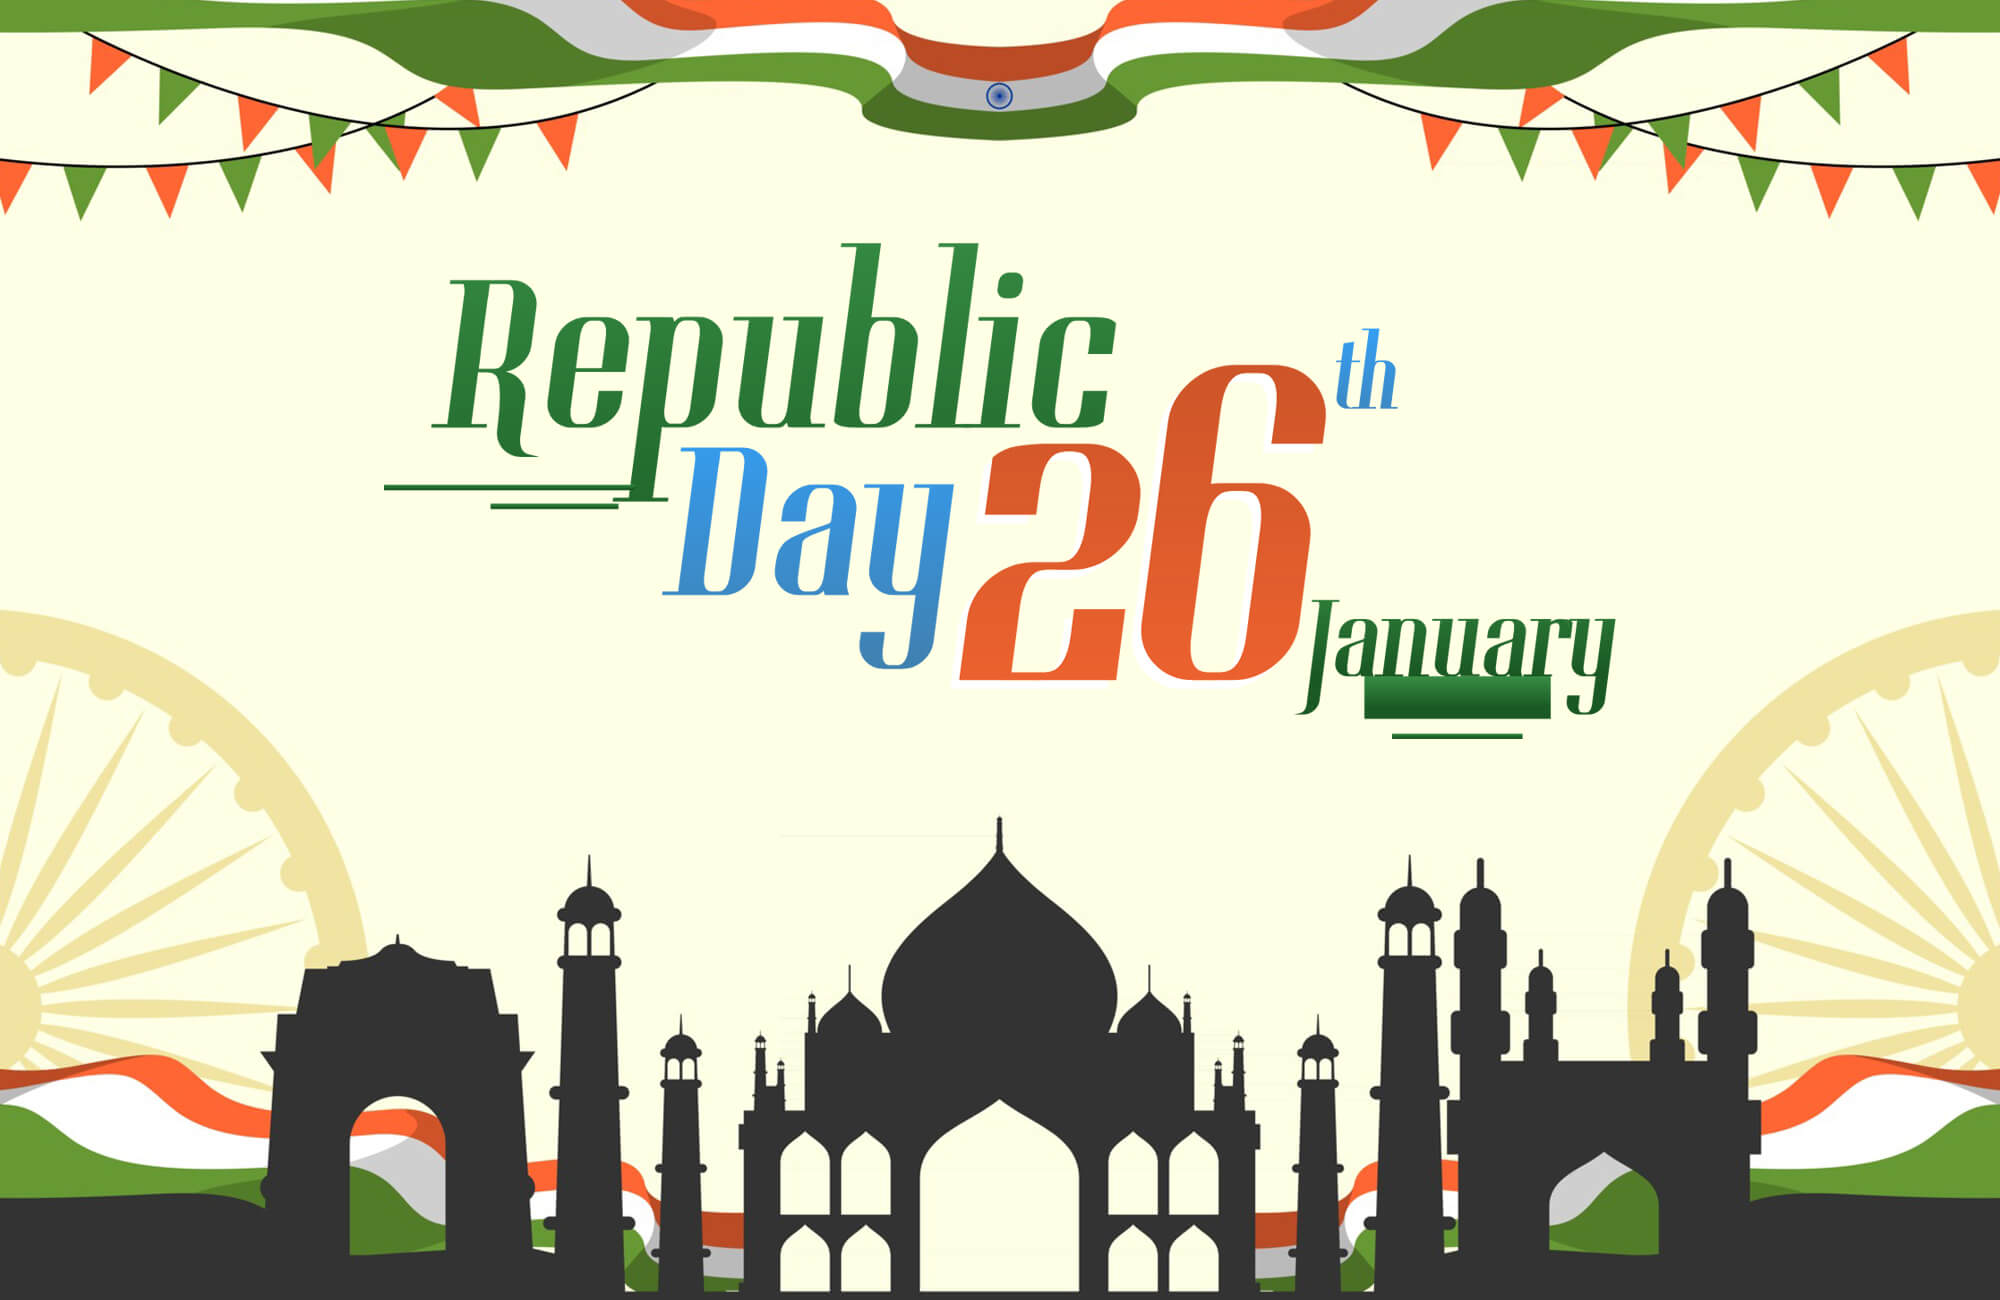 26th january of republic day beautiful background design